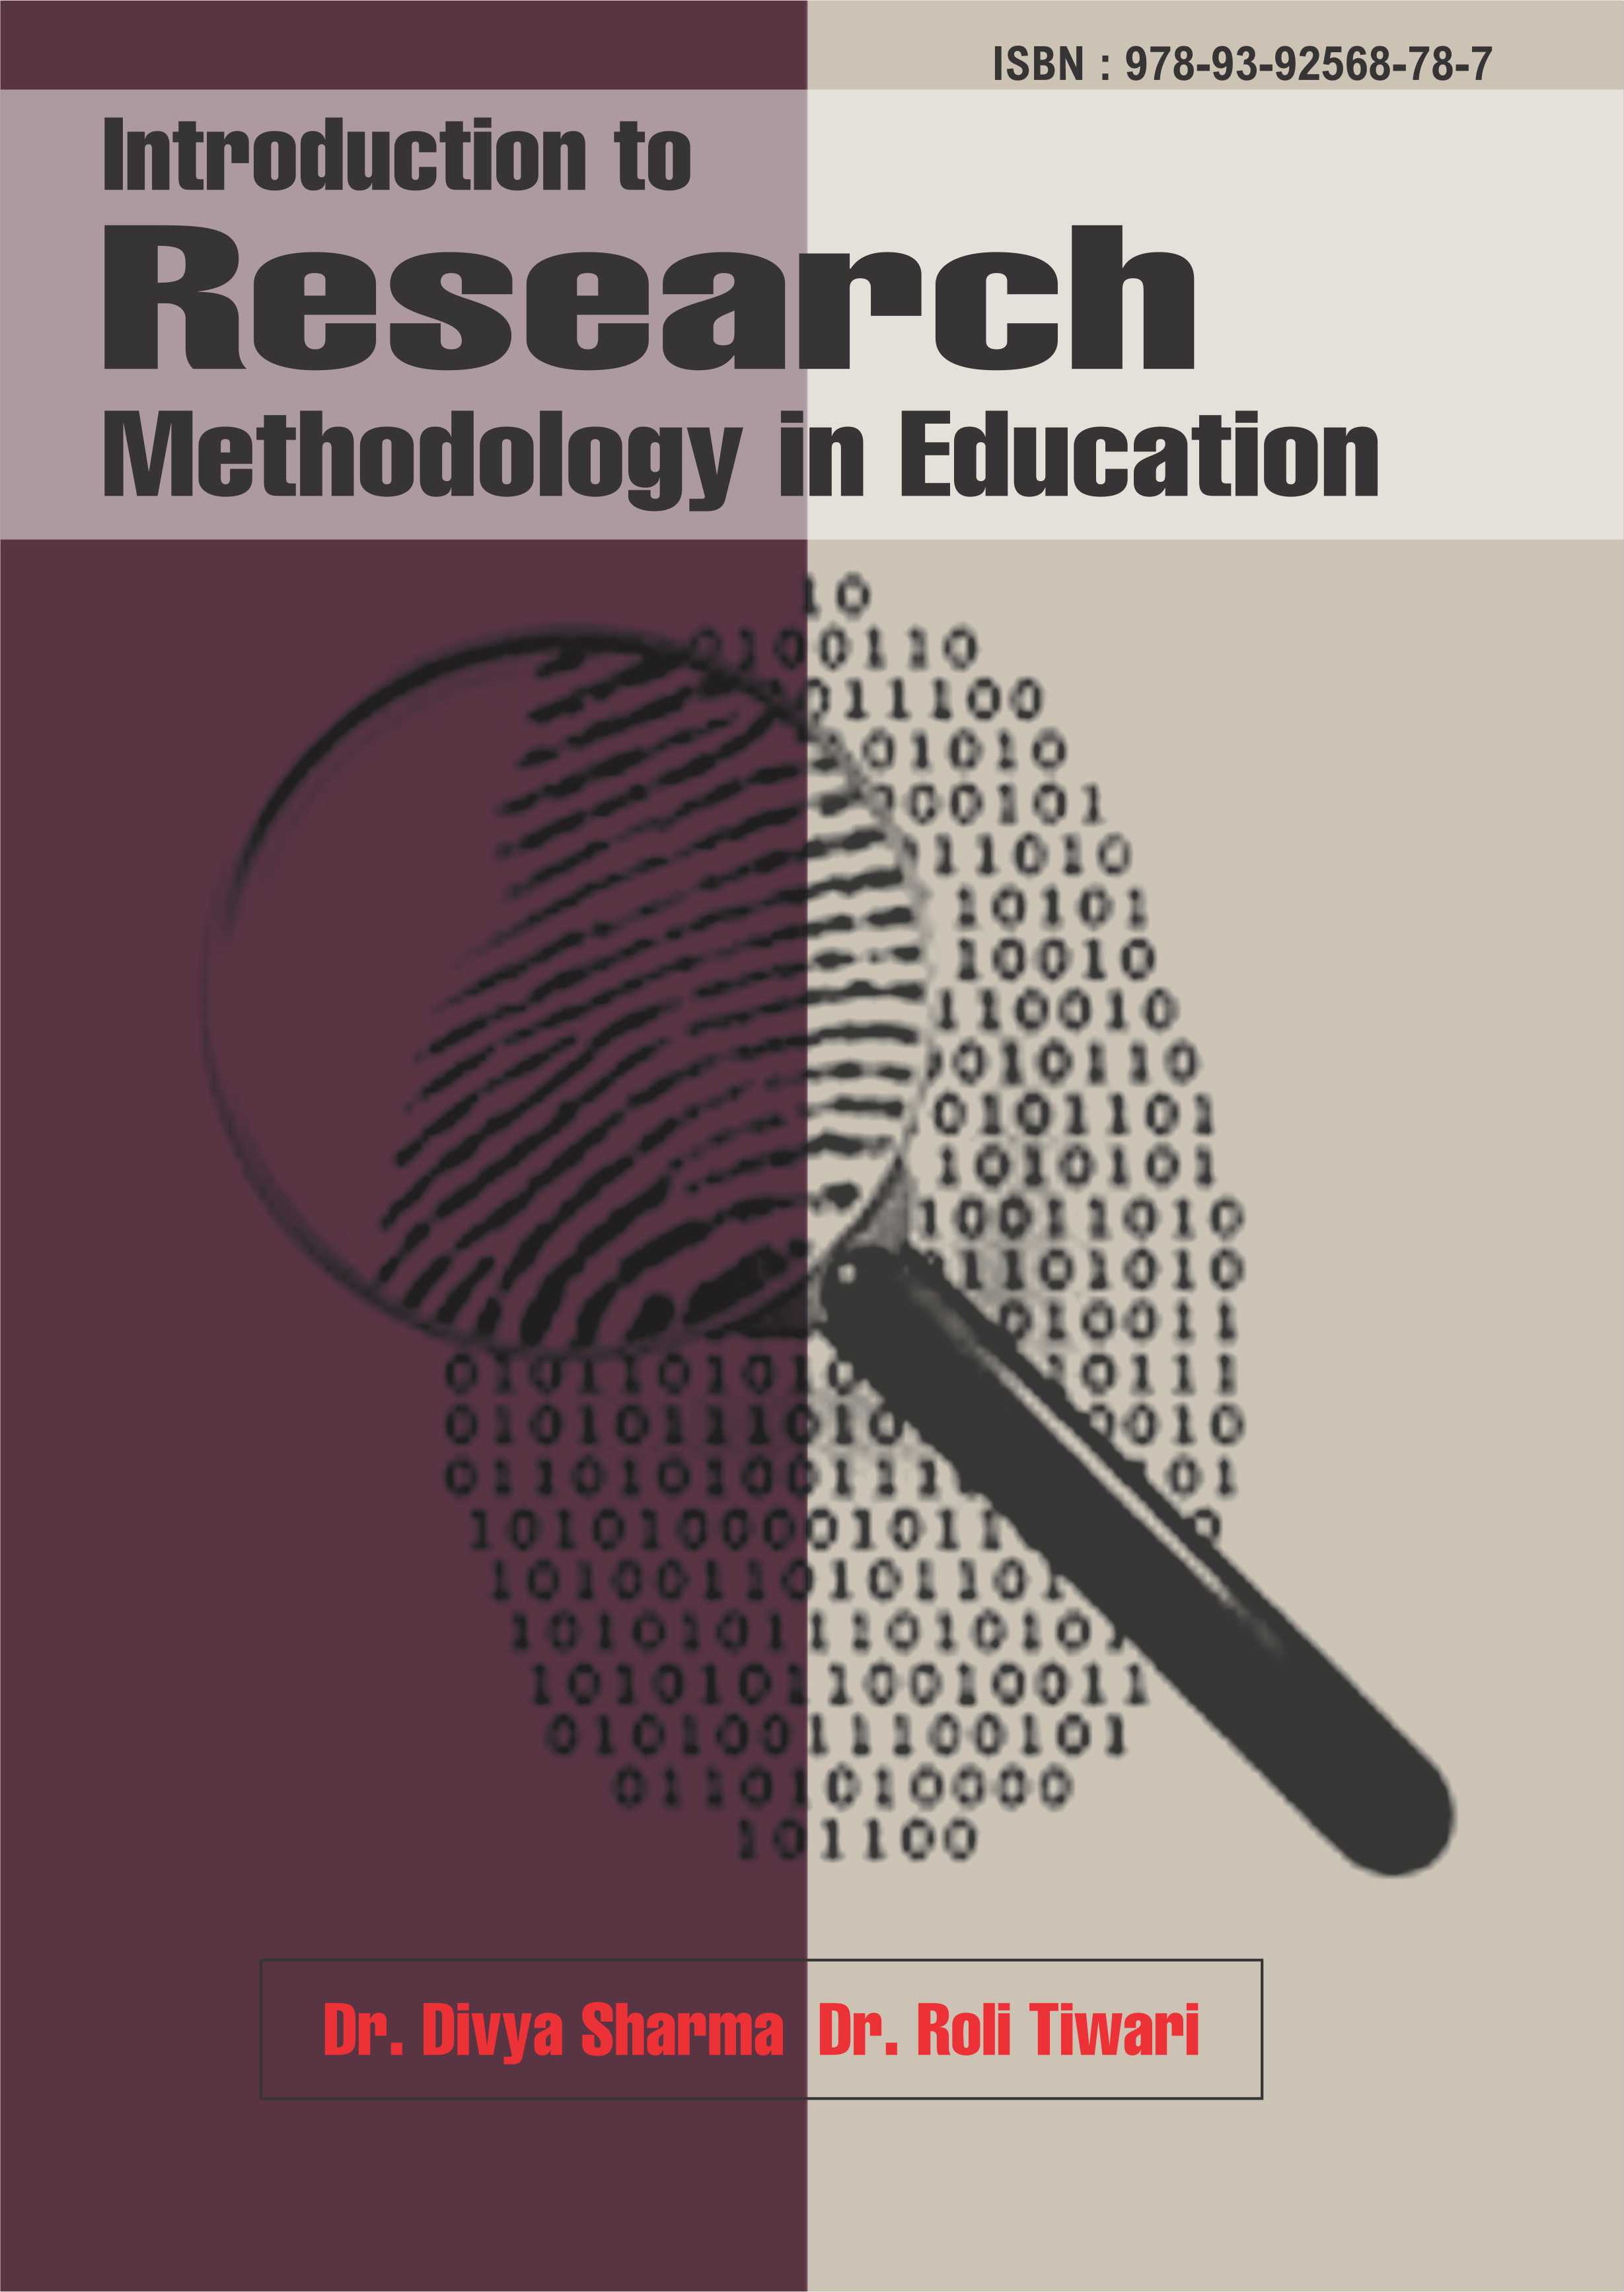 Introduction to Research Methodology in Education